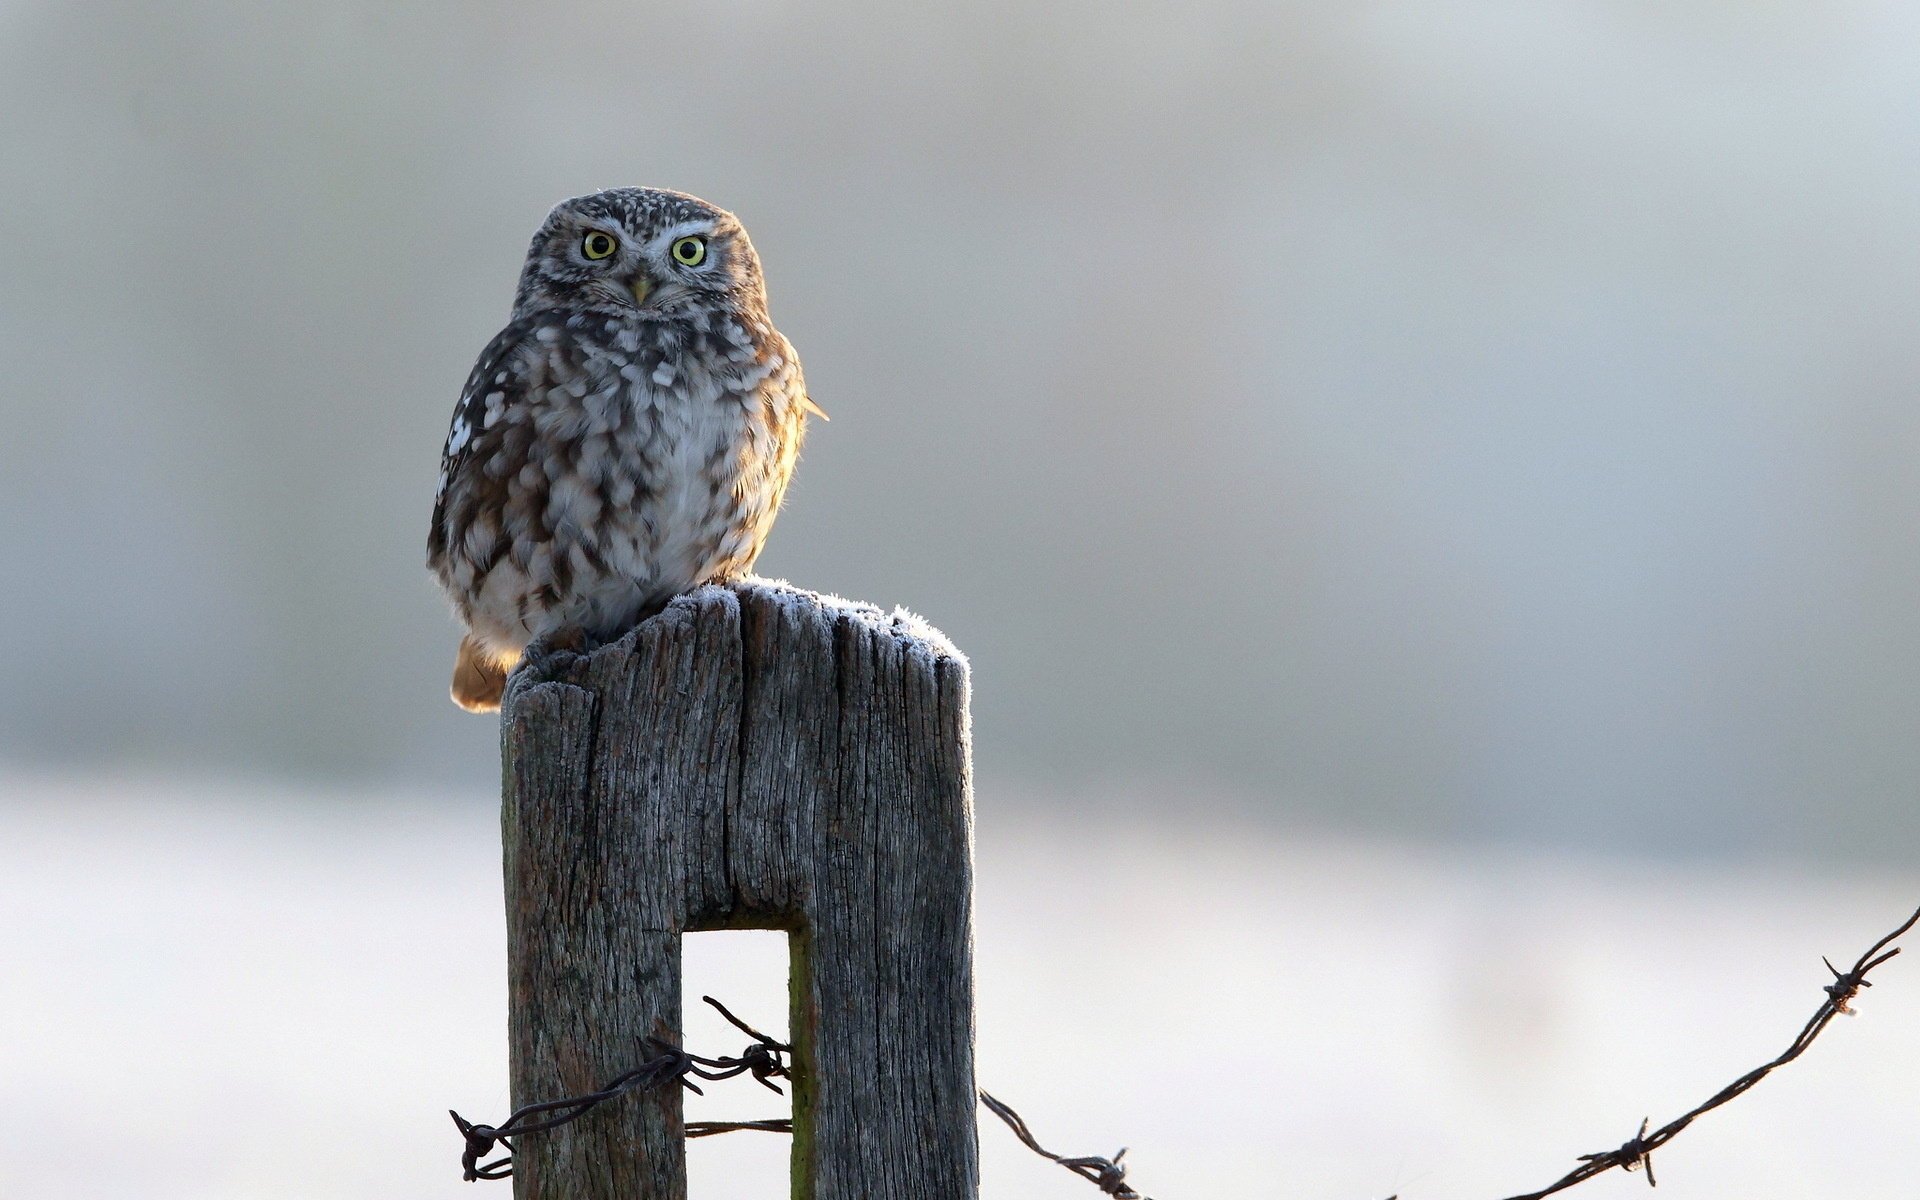 A small owl sits on the fence